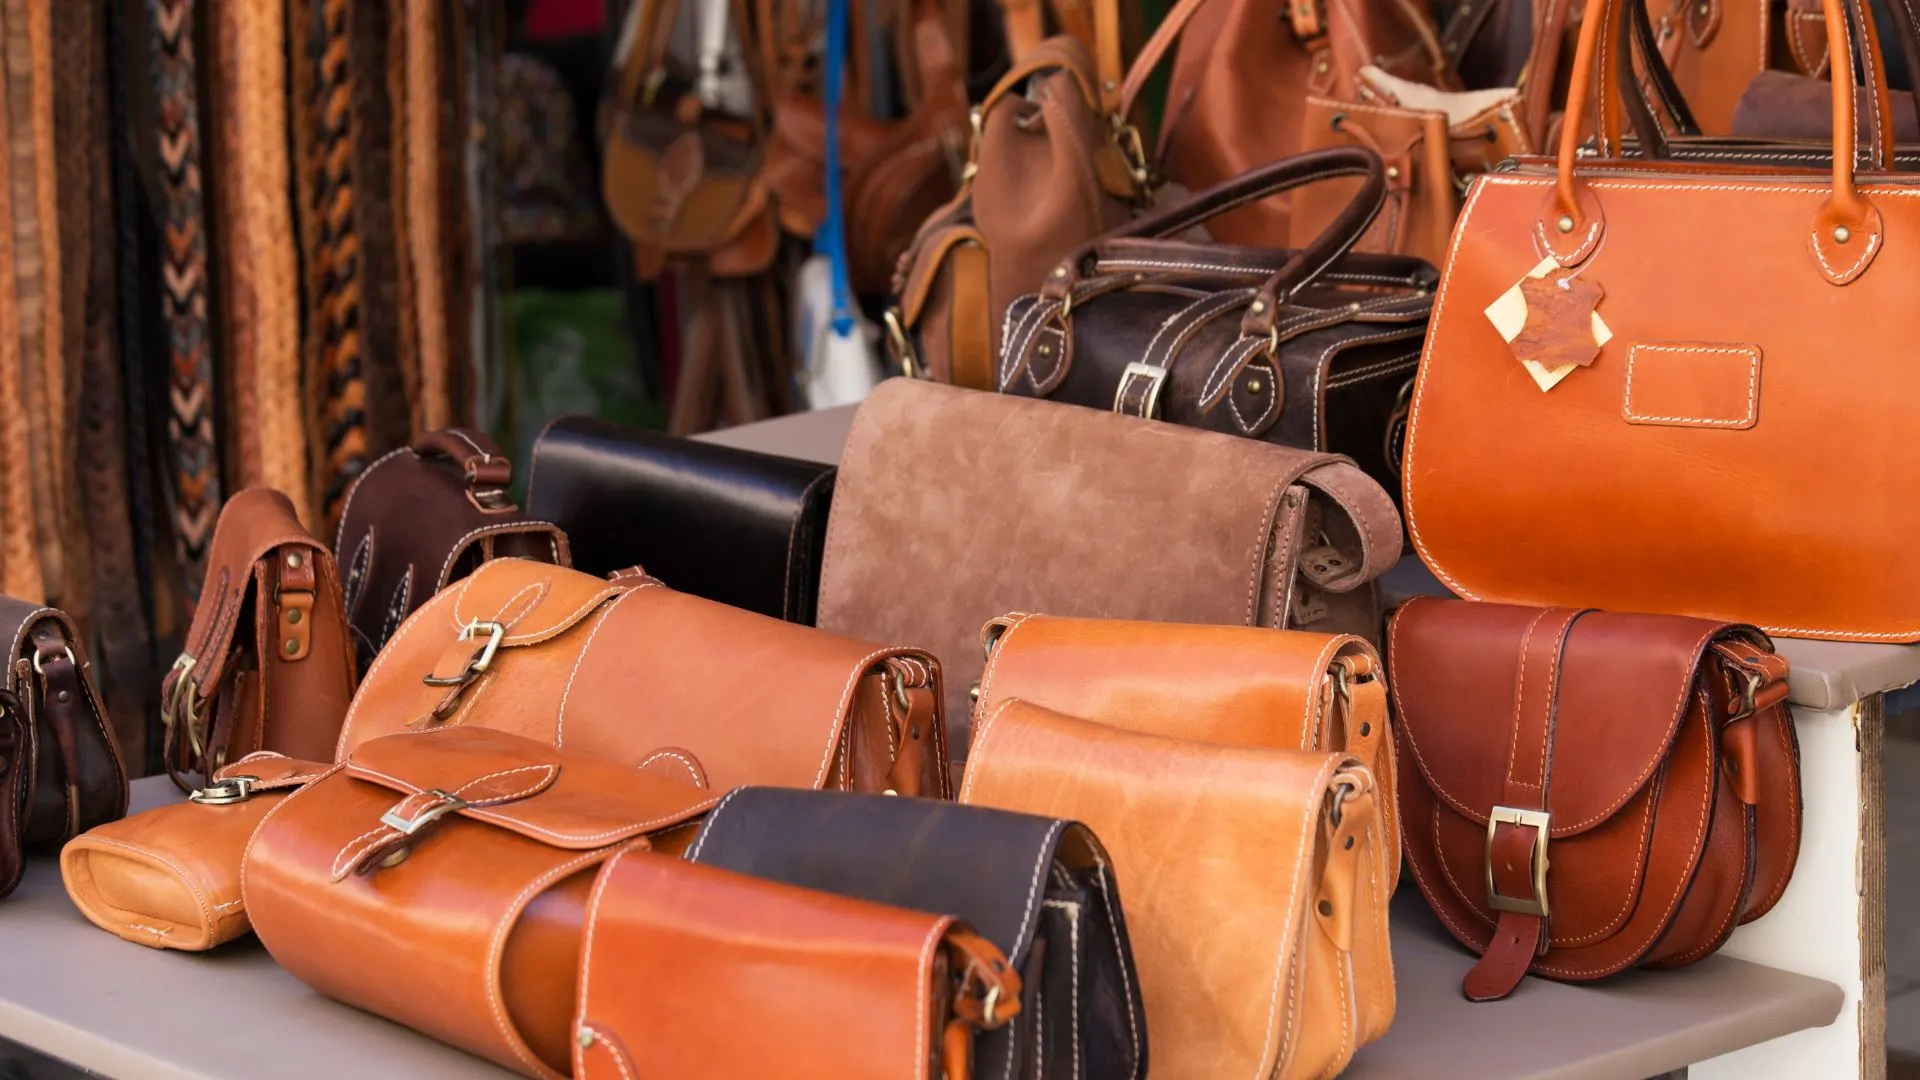 How Choosing Ethically Made Leather Bags Makes a Difference